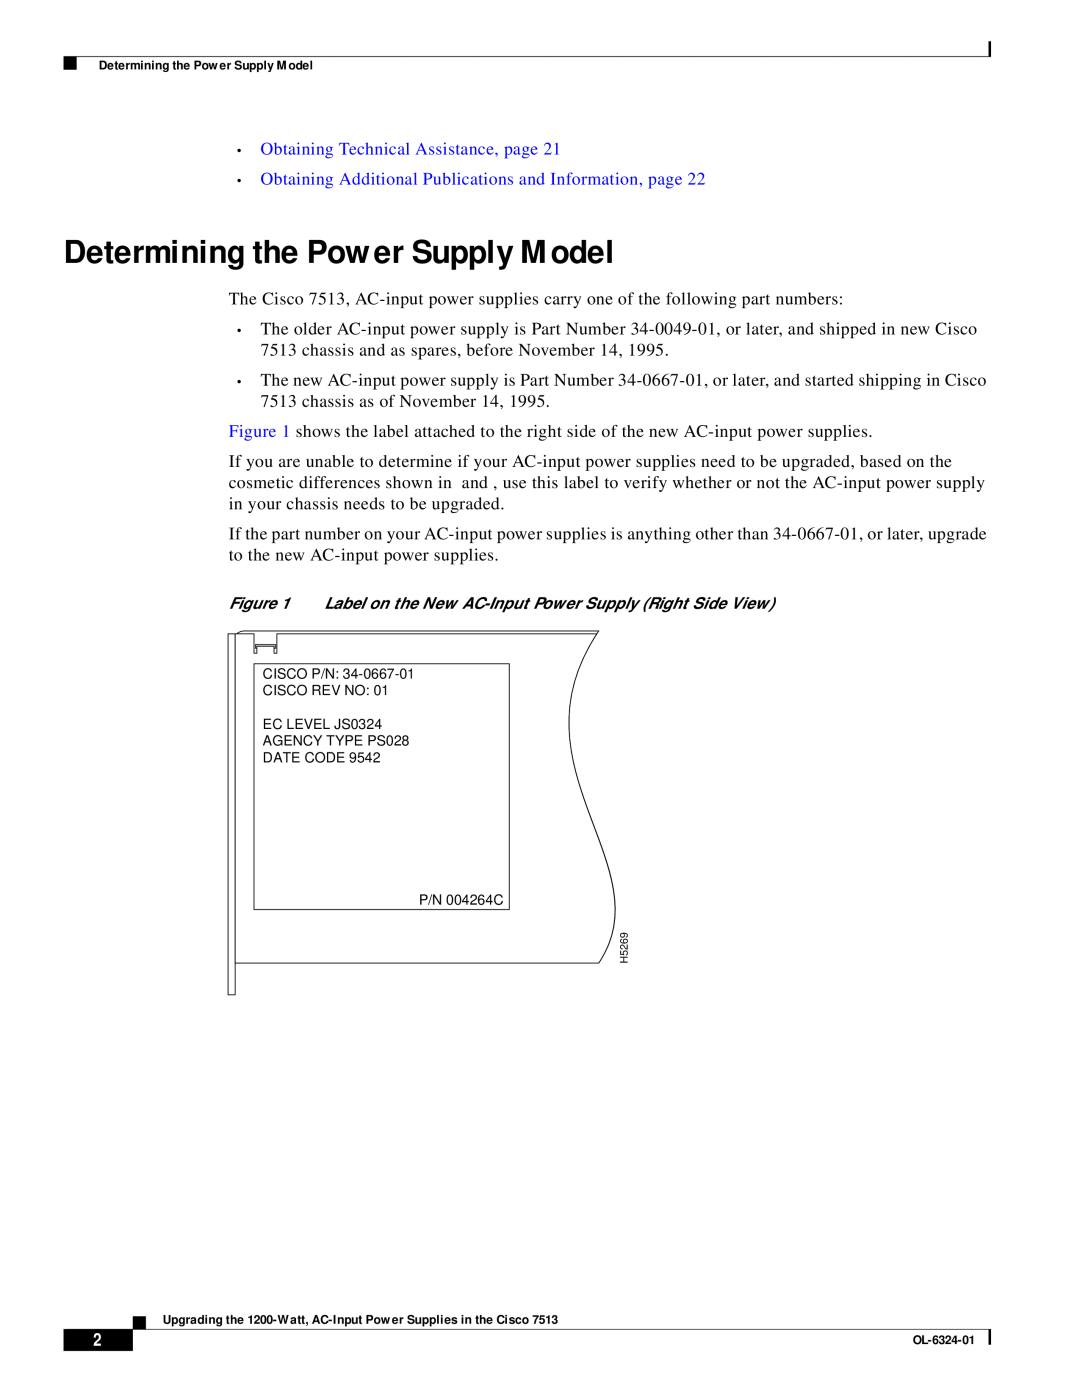 Cisco Systems 7513 manual Determining the Power Supply Model, Obtaining Technical Assistance, page 